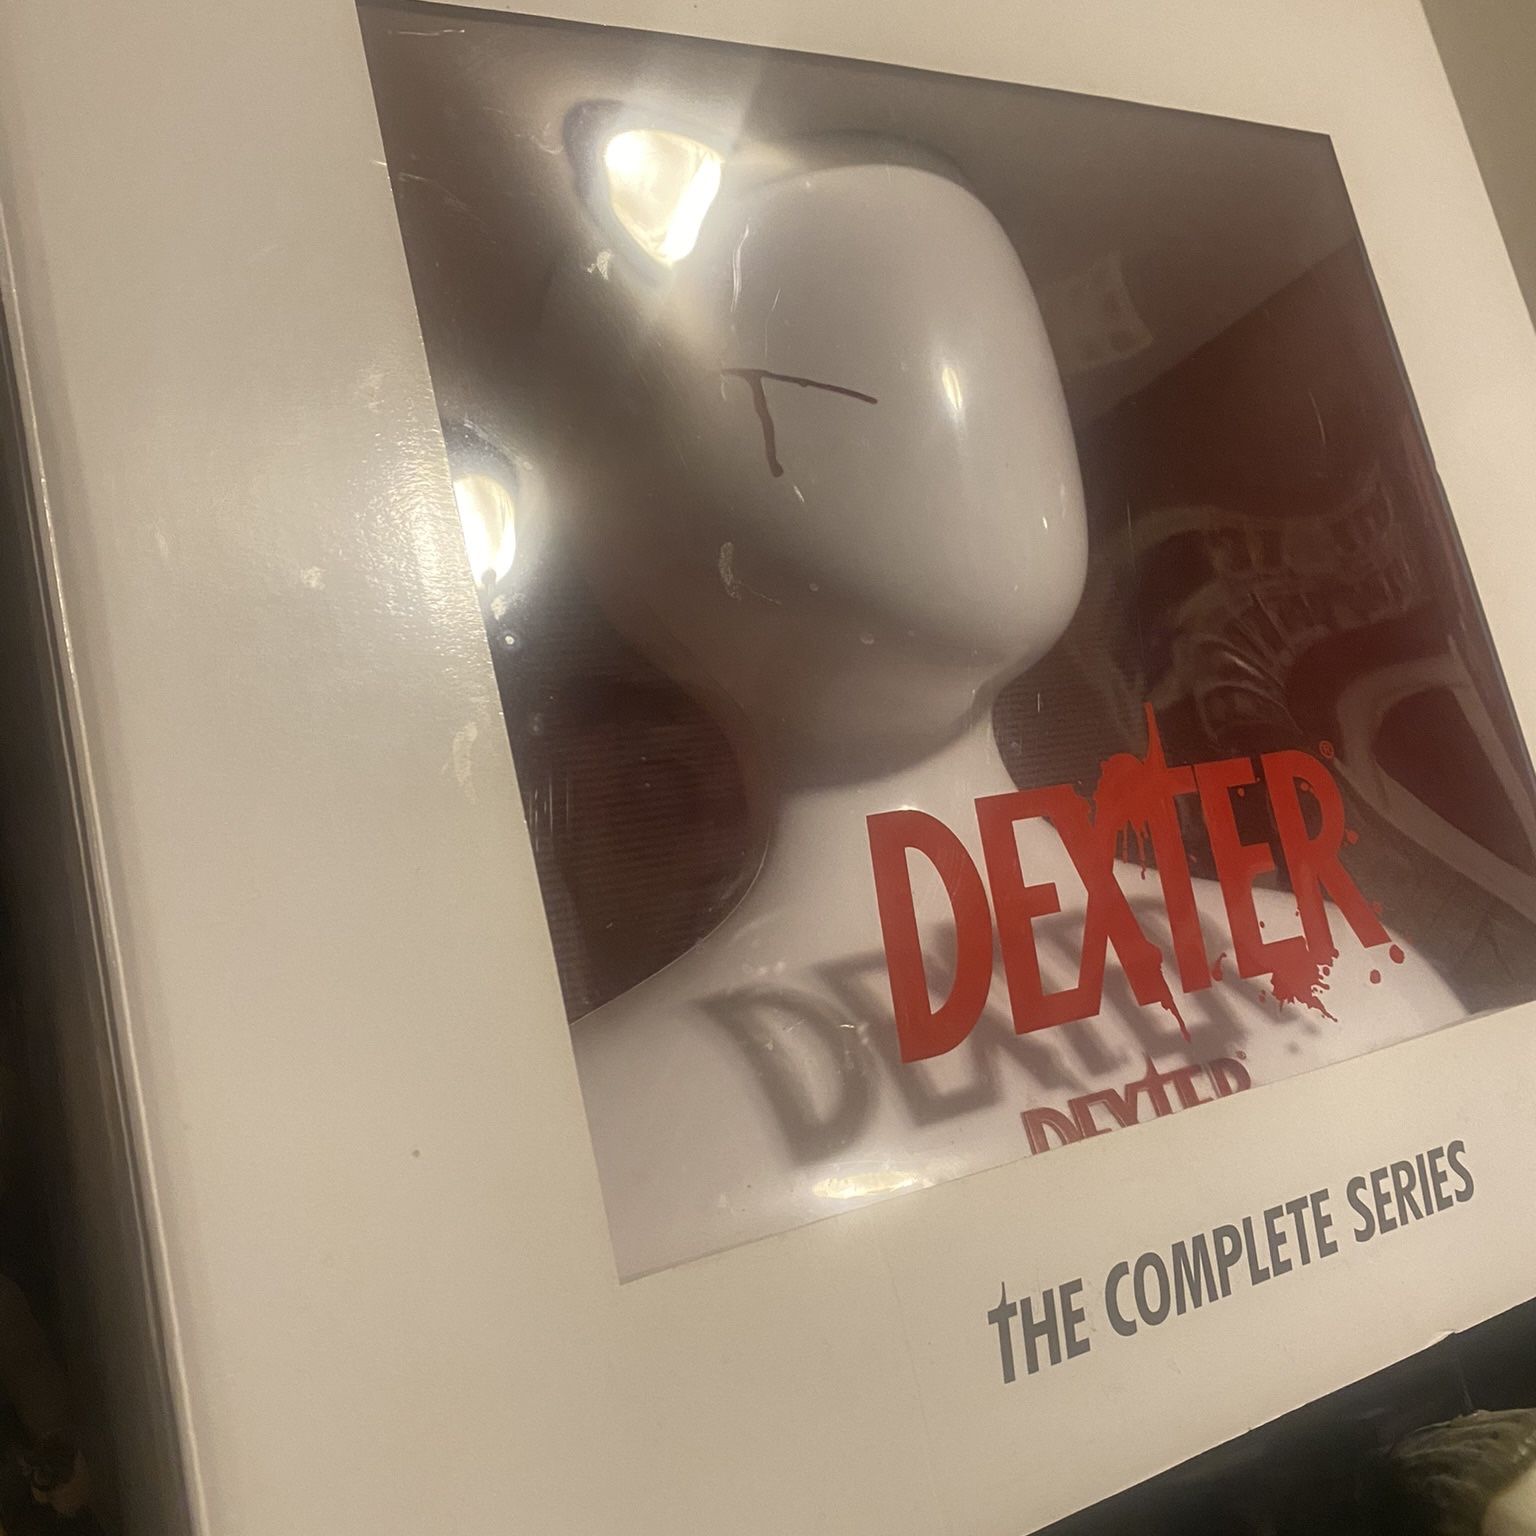 Dexter: The Complete Series Limited Edition Bust W/ Dexter Art Included!